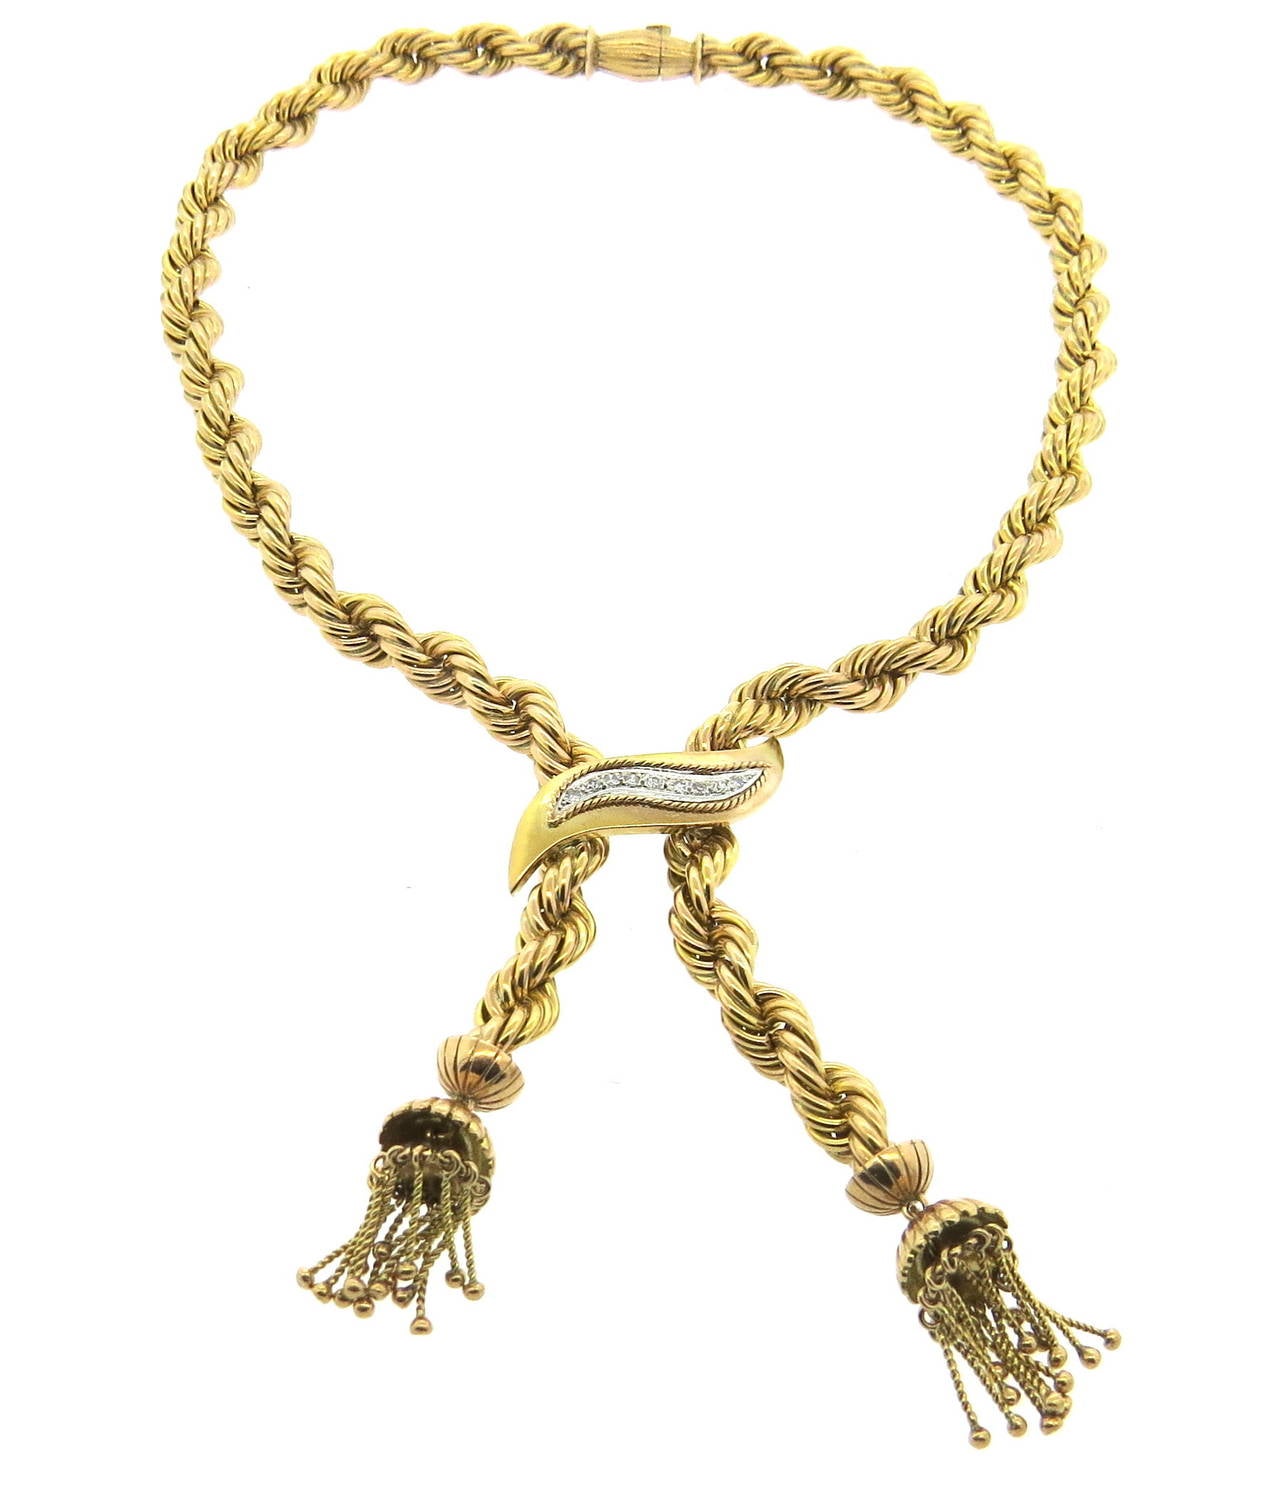 18k twisted pattern gold necklace, featuring approx. 0.20ctw in diamonds and two tassels. Necklace is 17